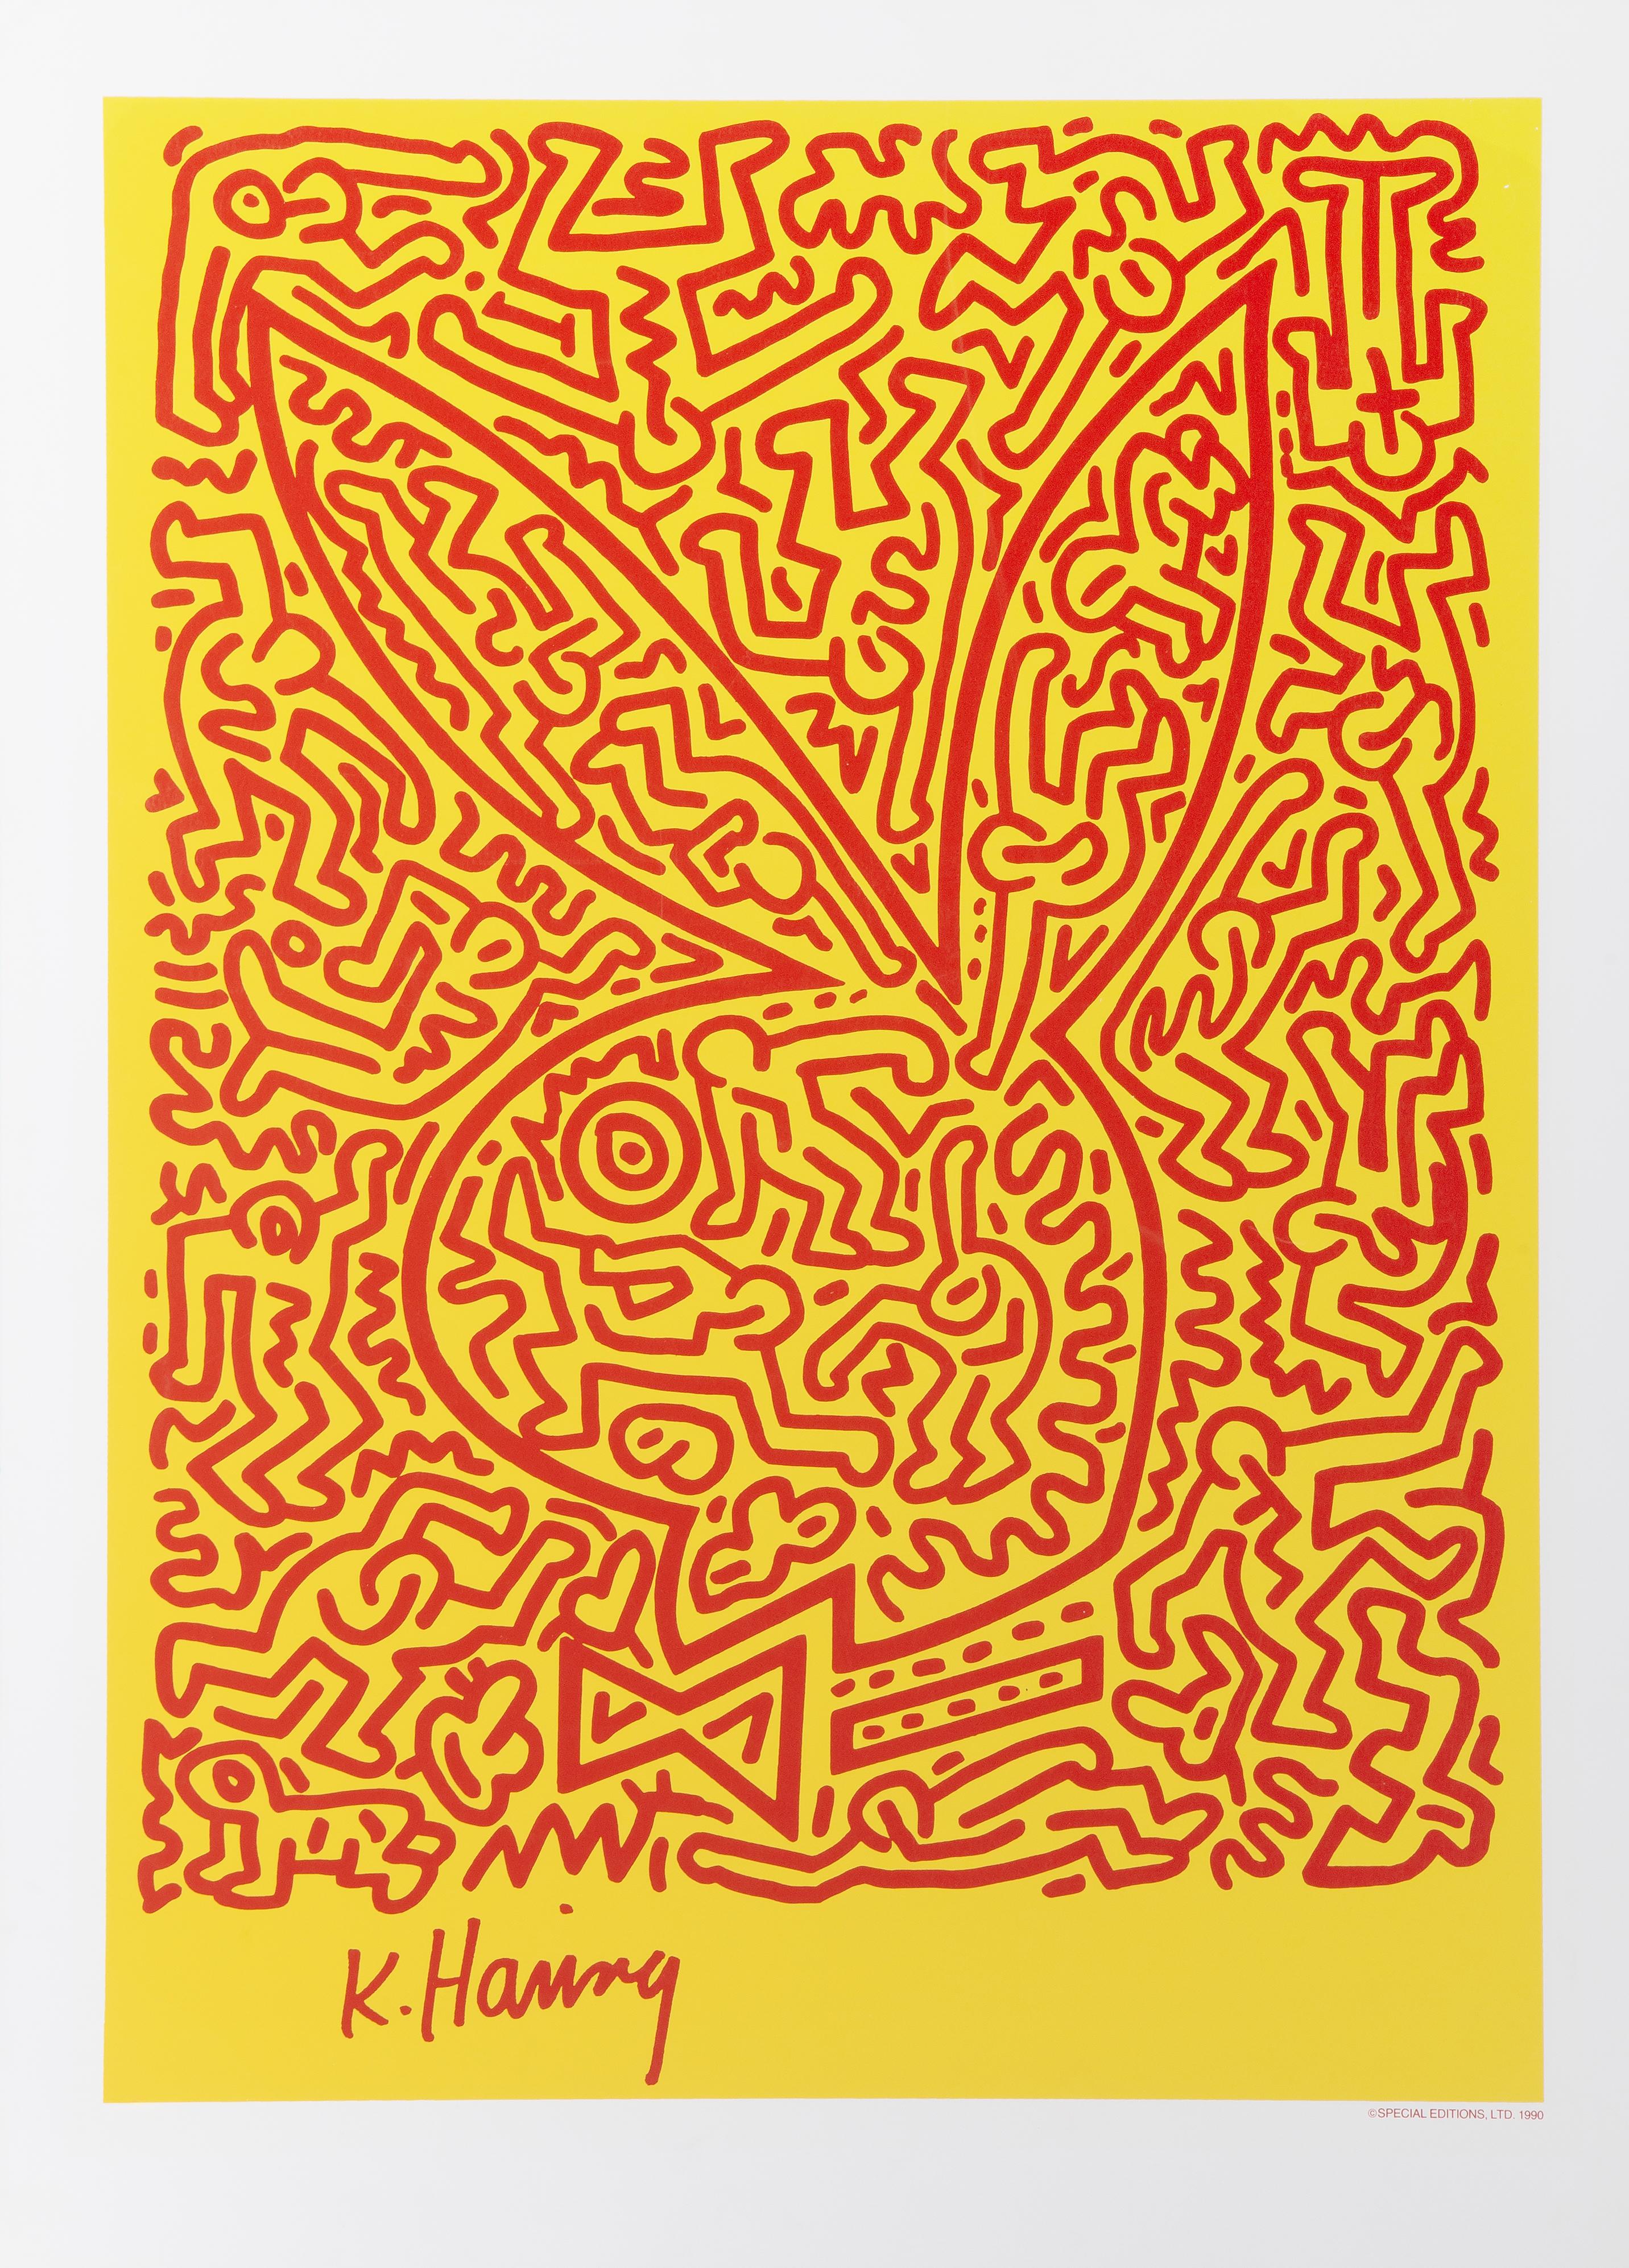 A limited edition silkscreen poster Keith Haring designed for Playboy. This limited edition run of 1000 was published in 1990 by Special Editions Ltd. The signature and date 'K. Haring' is in the printing. The sheet size is 32 x 23 inches and the